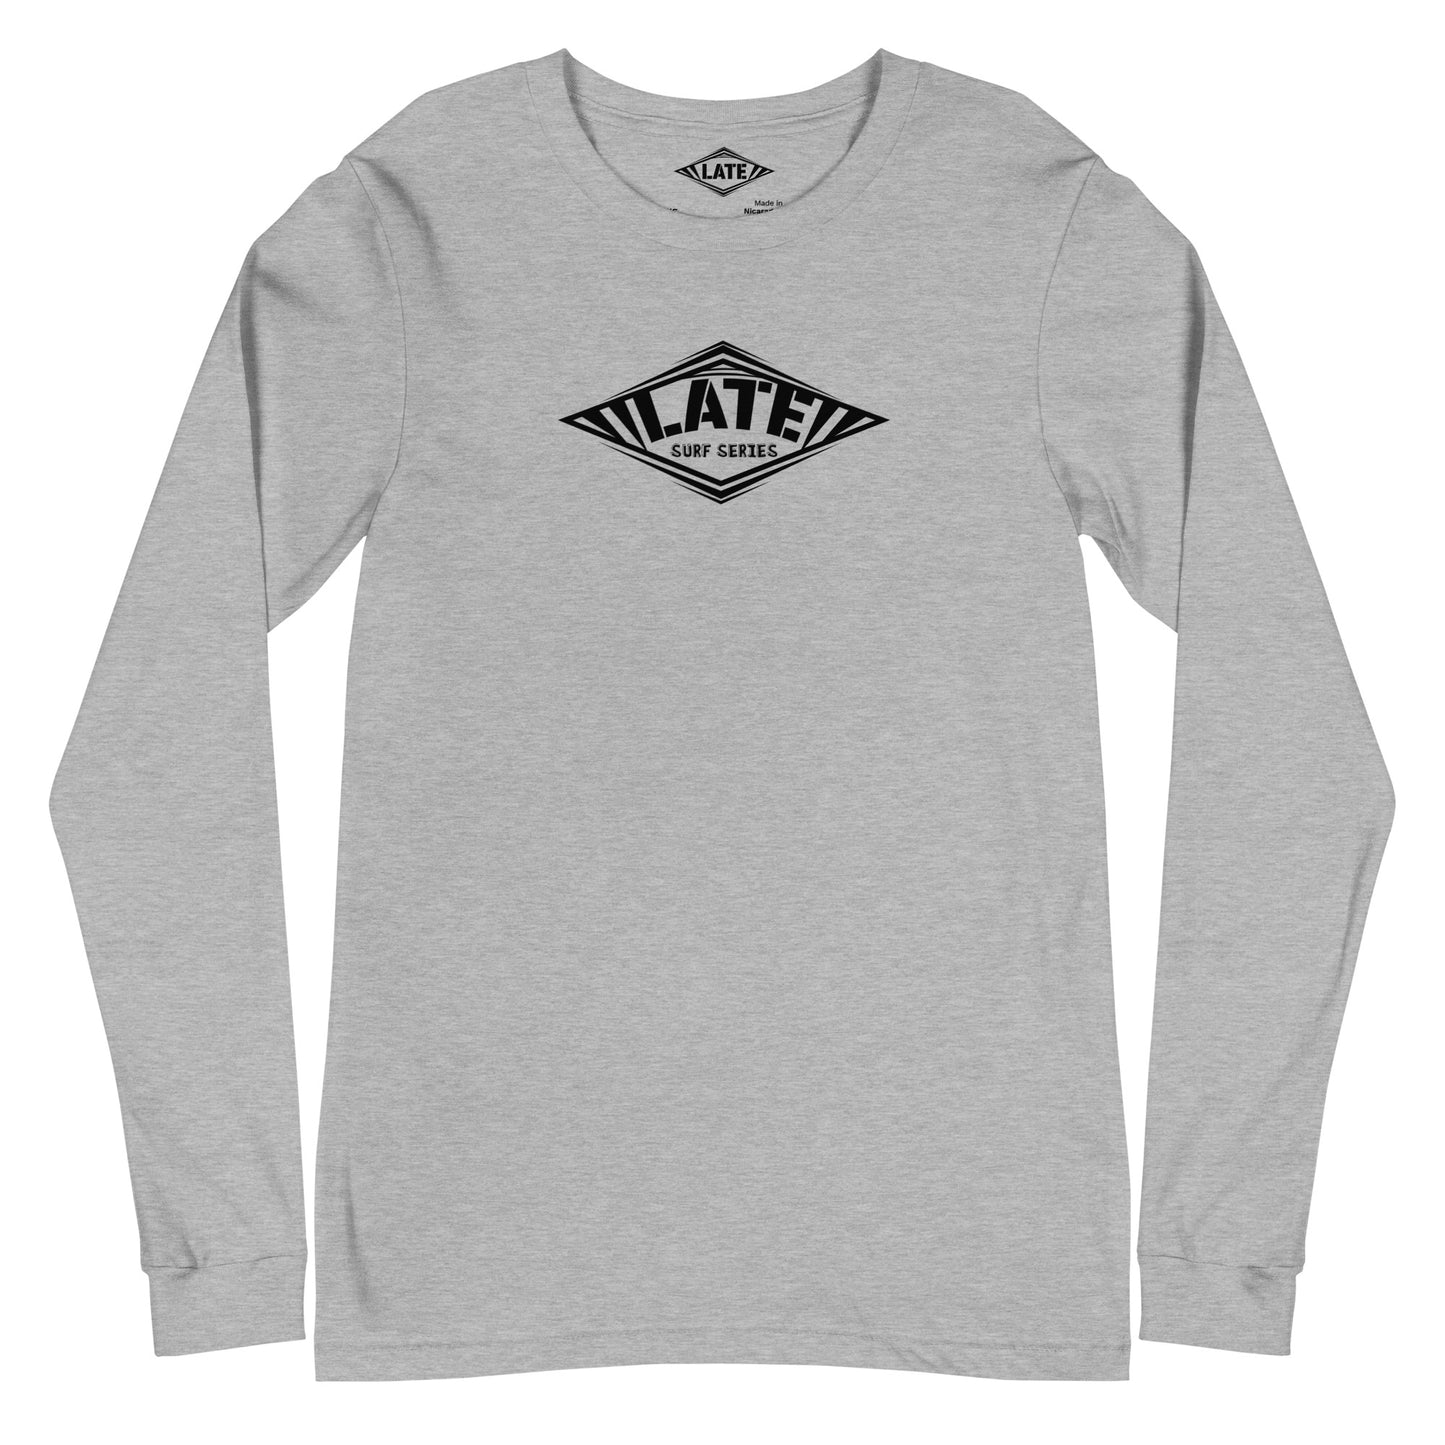 Long Sleeve Surf series Take On The Elements logo Late, unisex, face, couleur gris